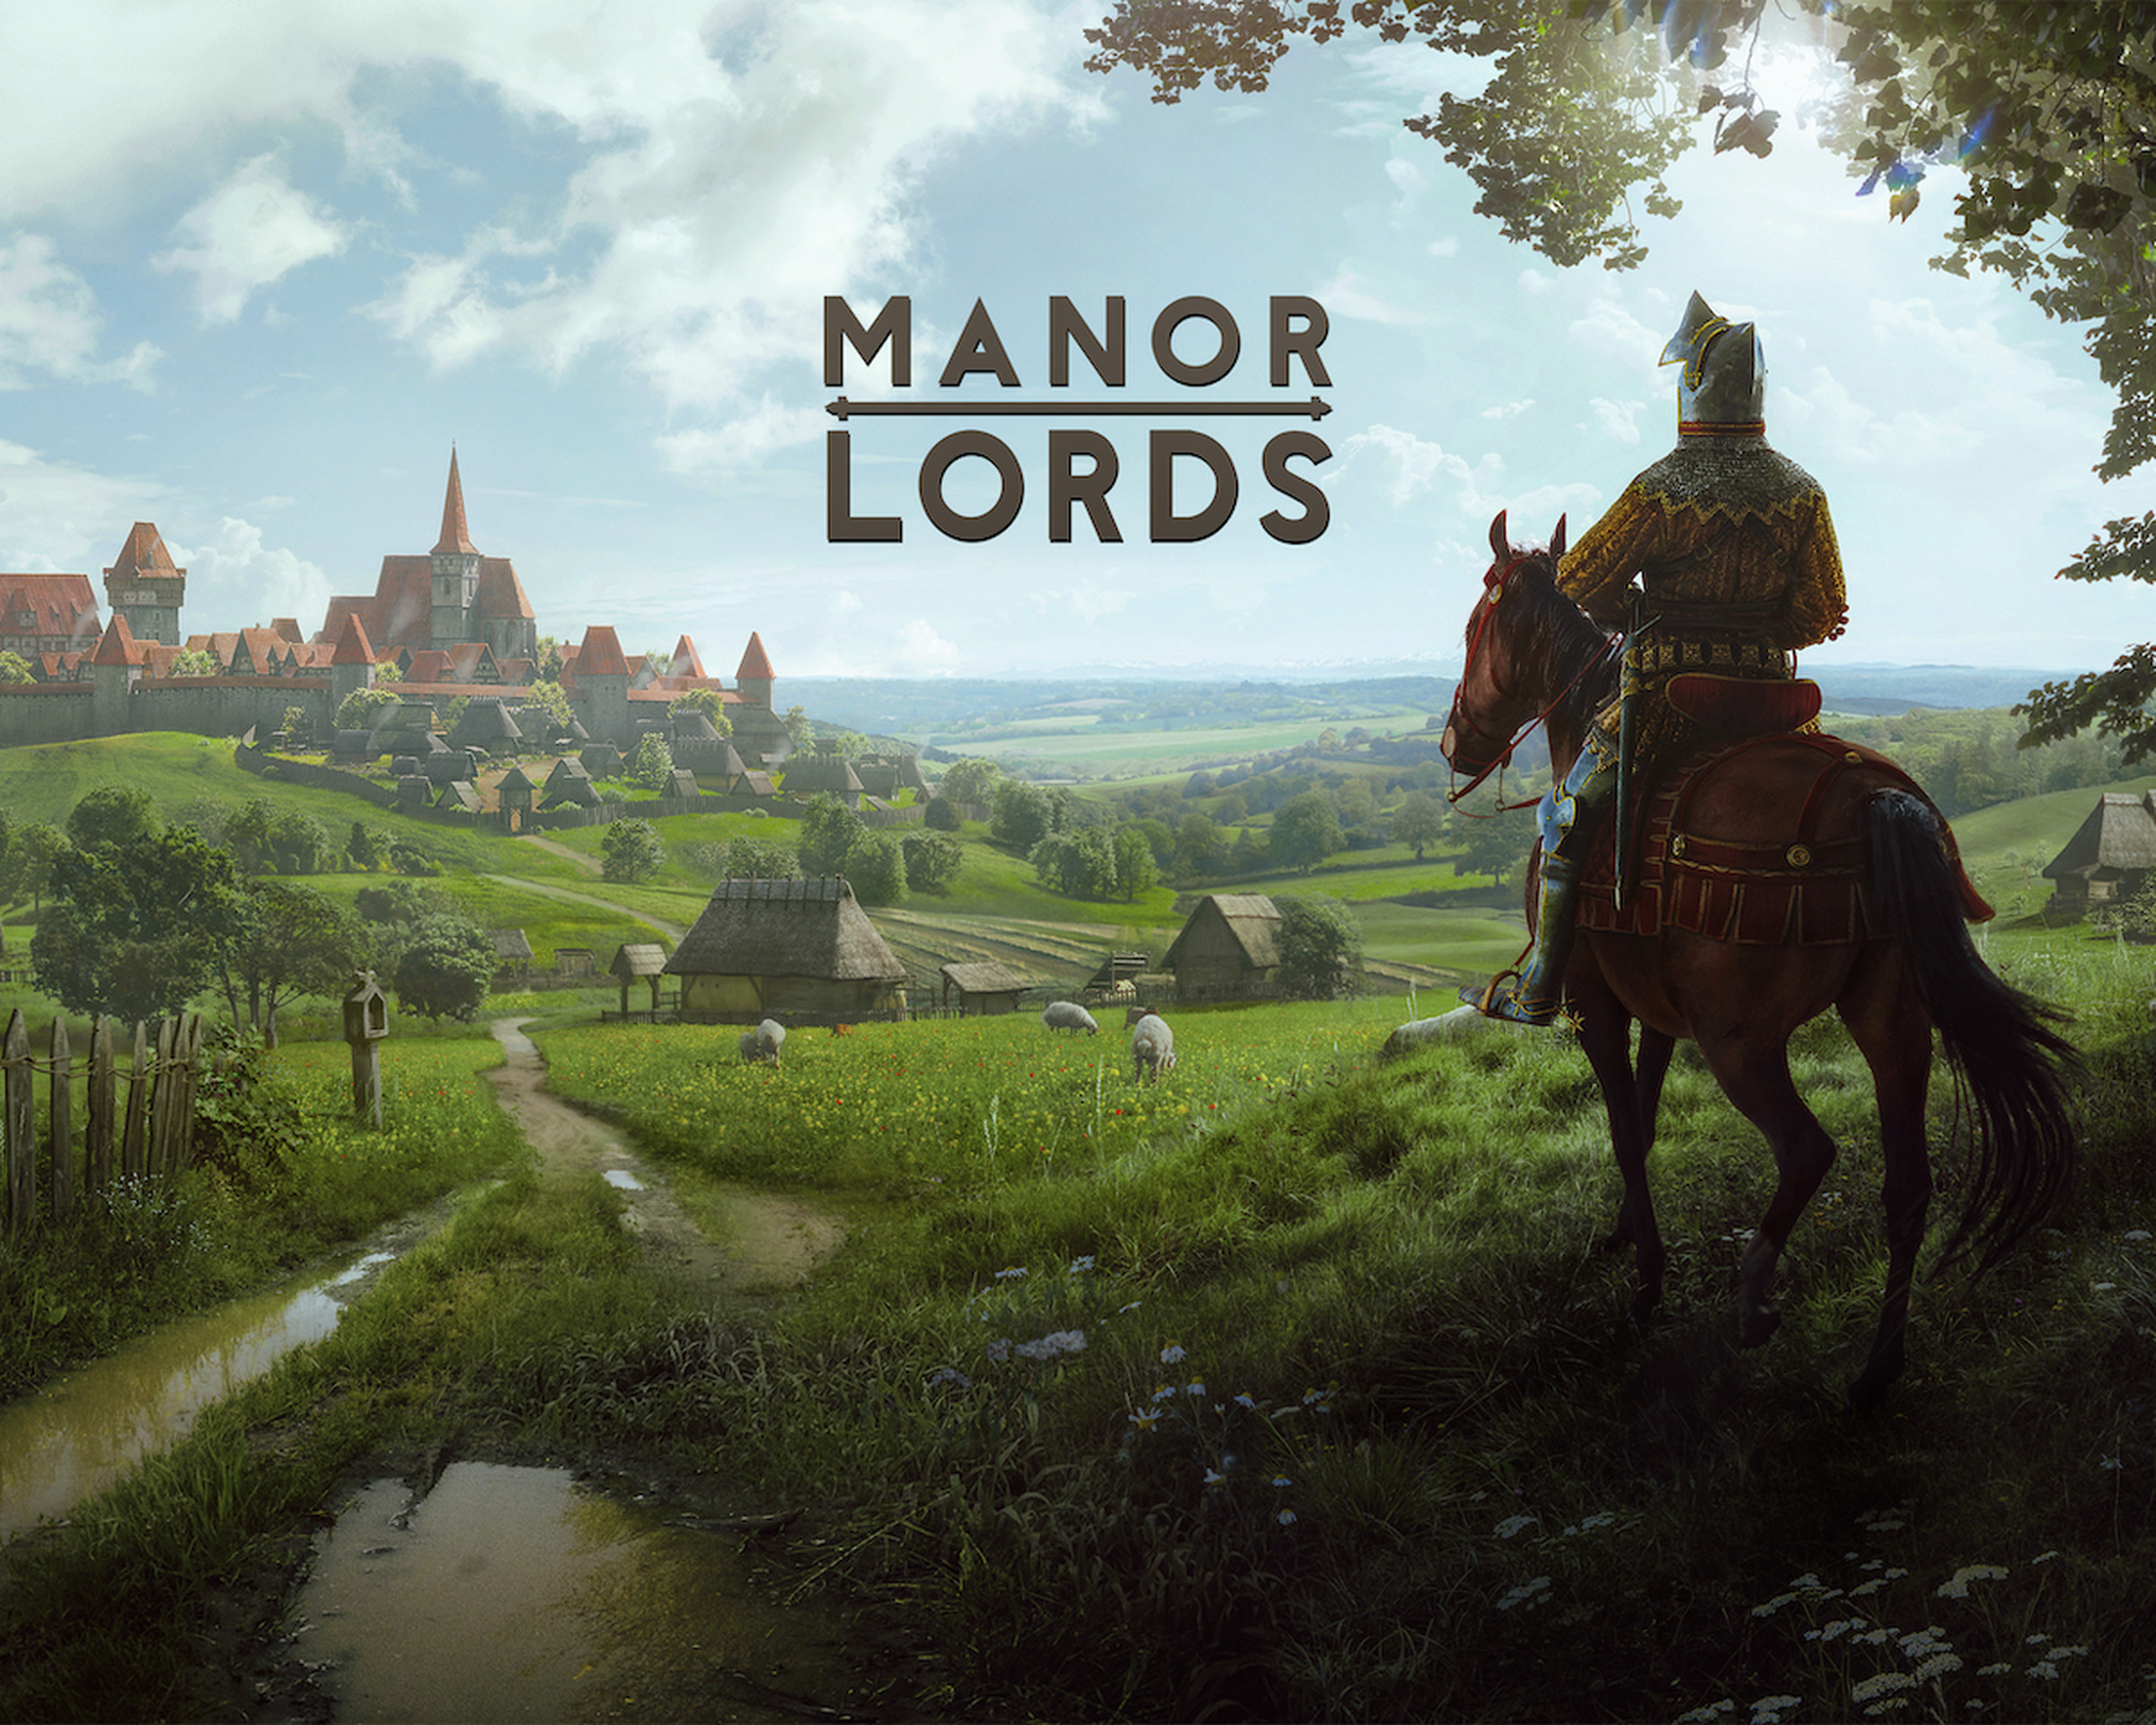 Key art of Manor Lords featuring a knight on a horse overlooking a small medieval town with the text “Manor Lords” in the center of the image.